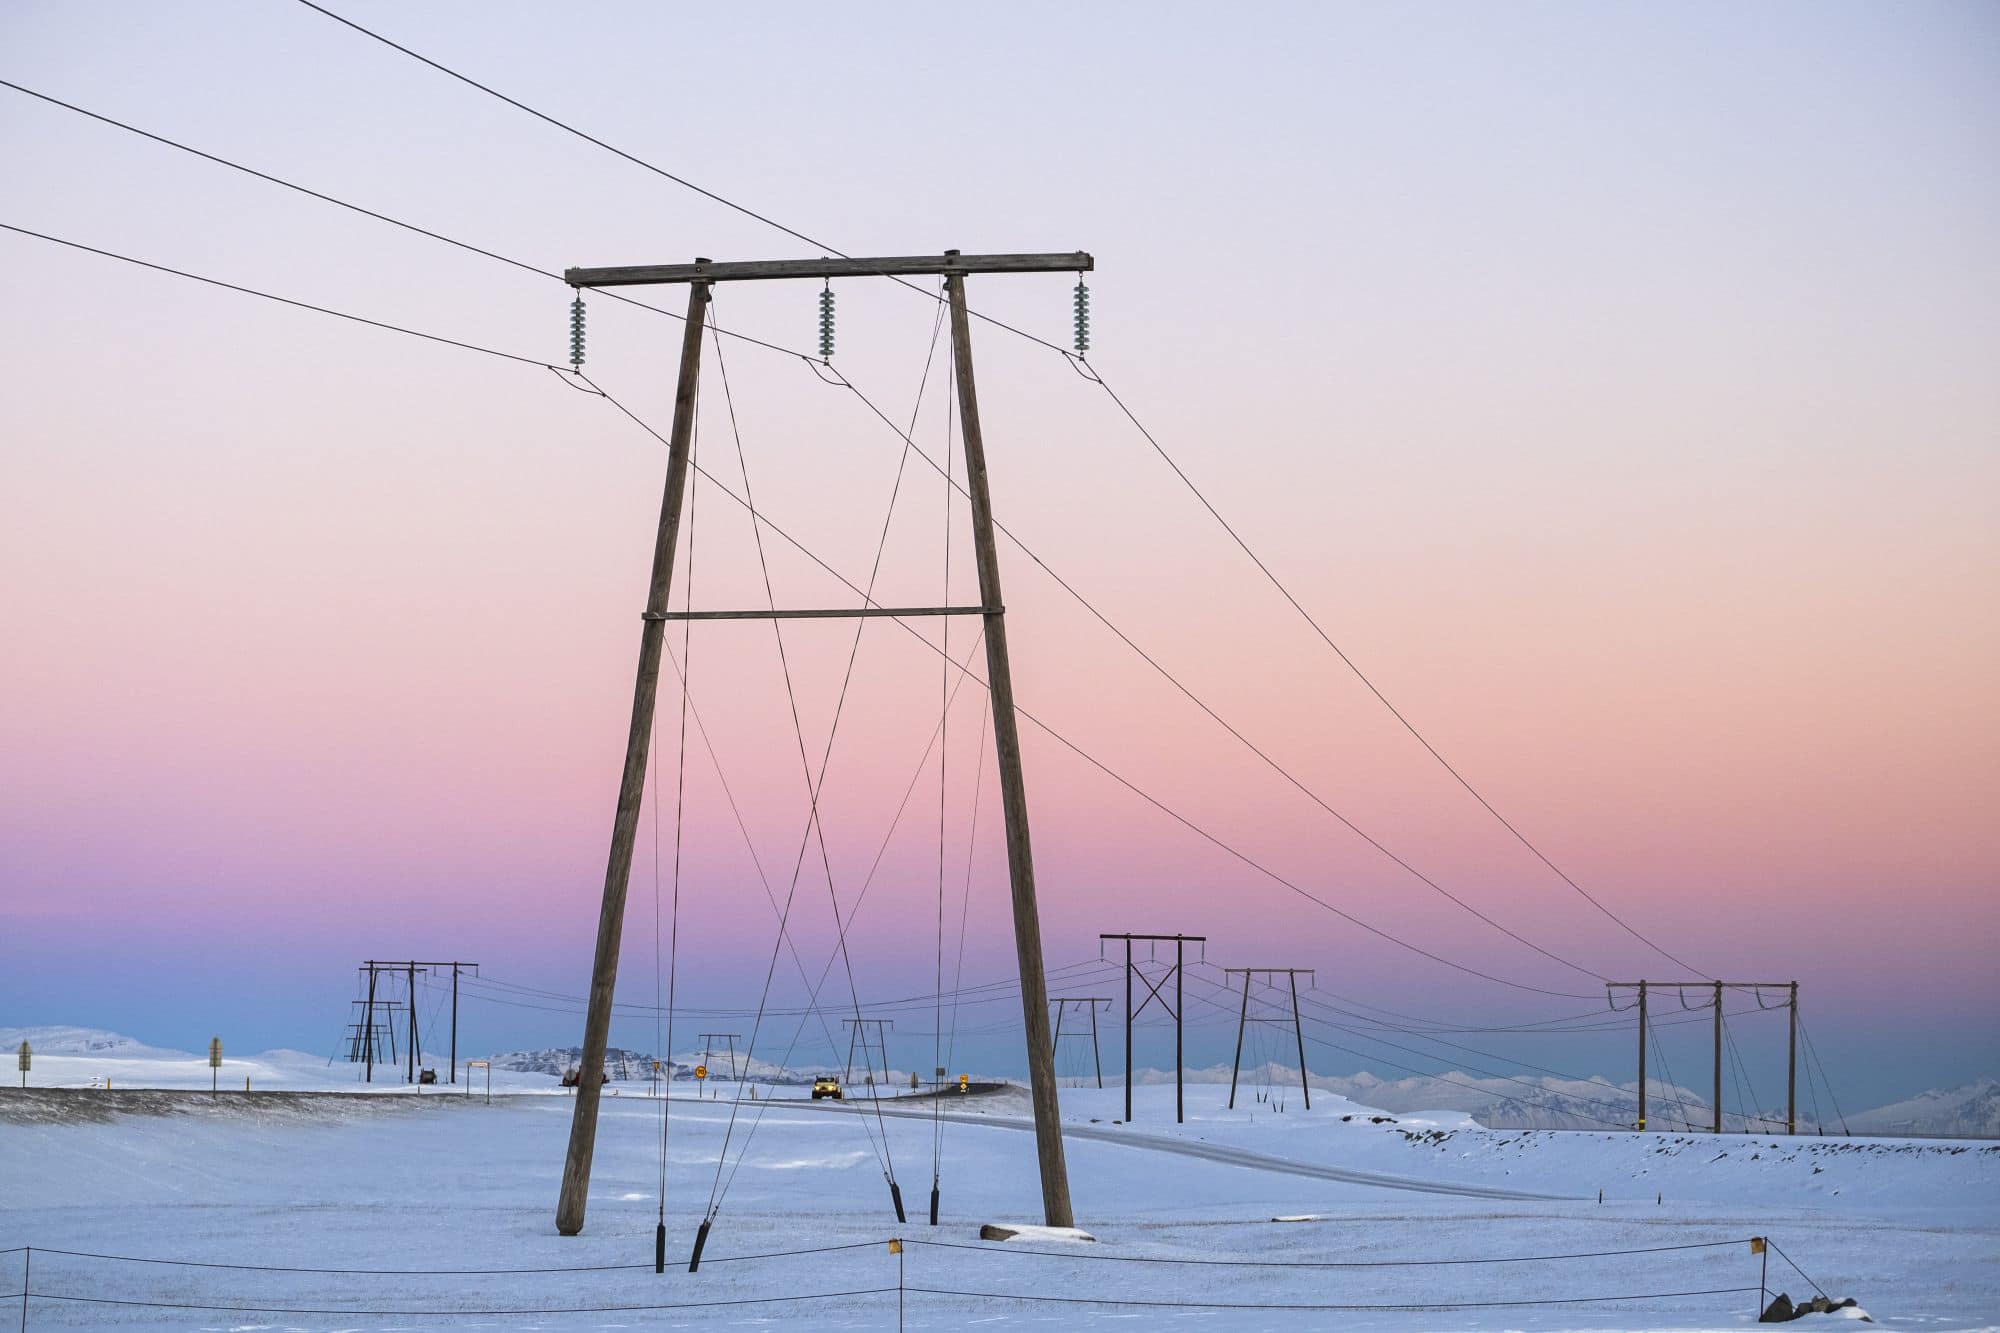 Iceland's Low-Cost Electricity in High Demand as Energy Prices Skyrocket in Europe